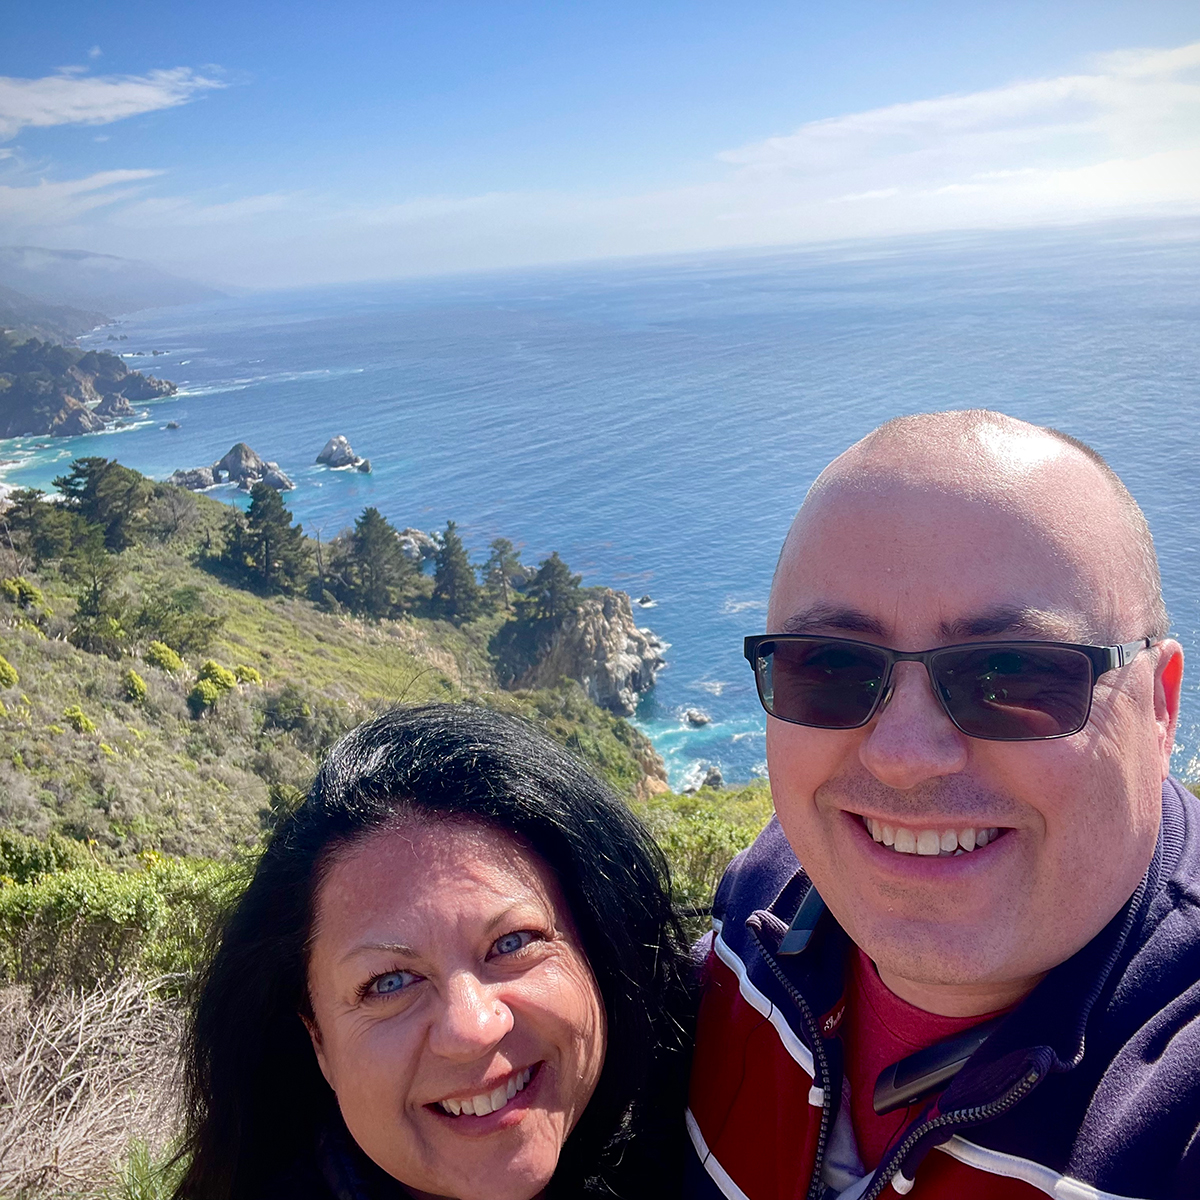 Steve and Rebecca Blackwell standing at the top of a cliffside overlooking the Pacific Ocean along the California coast.